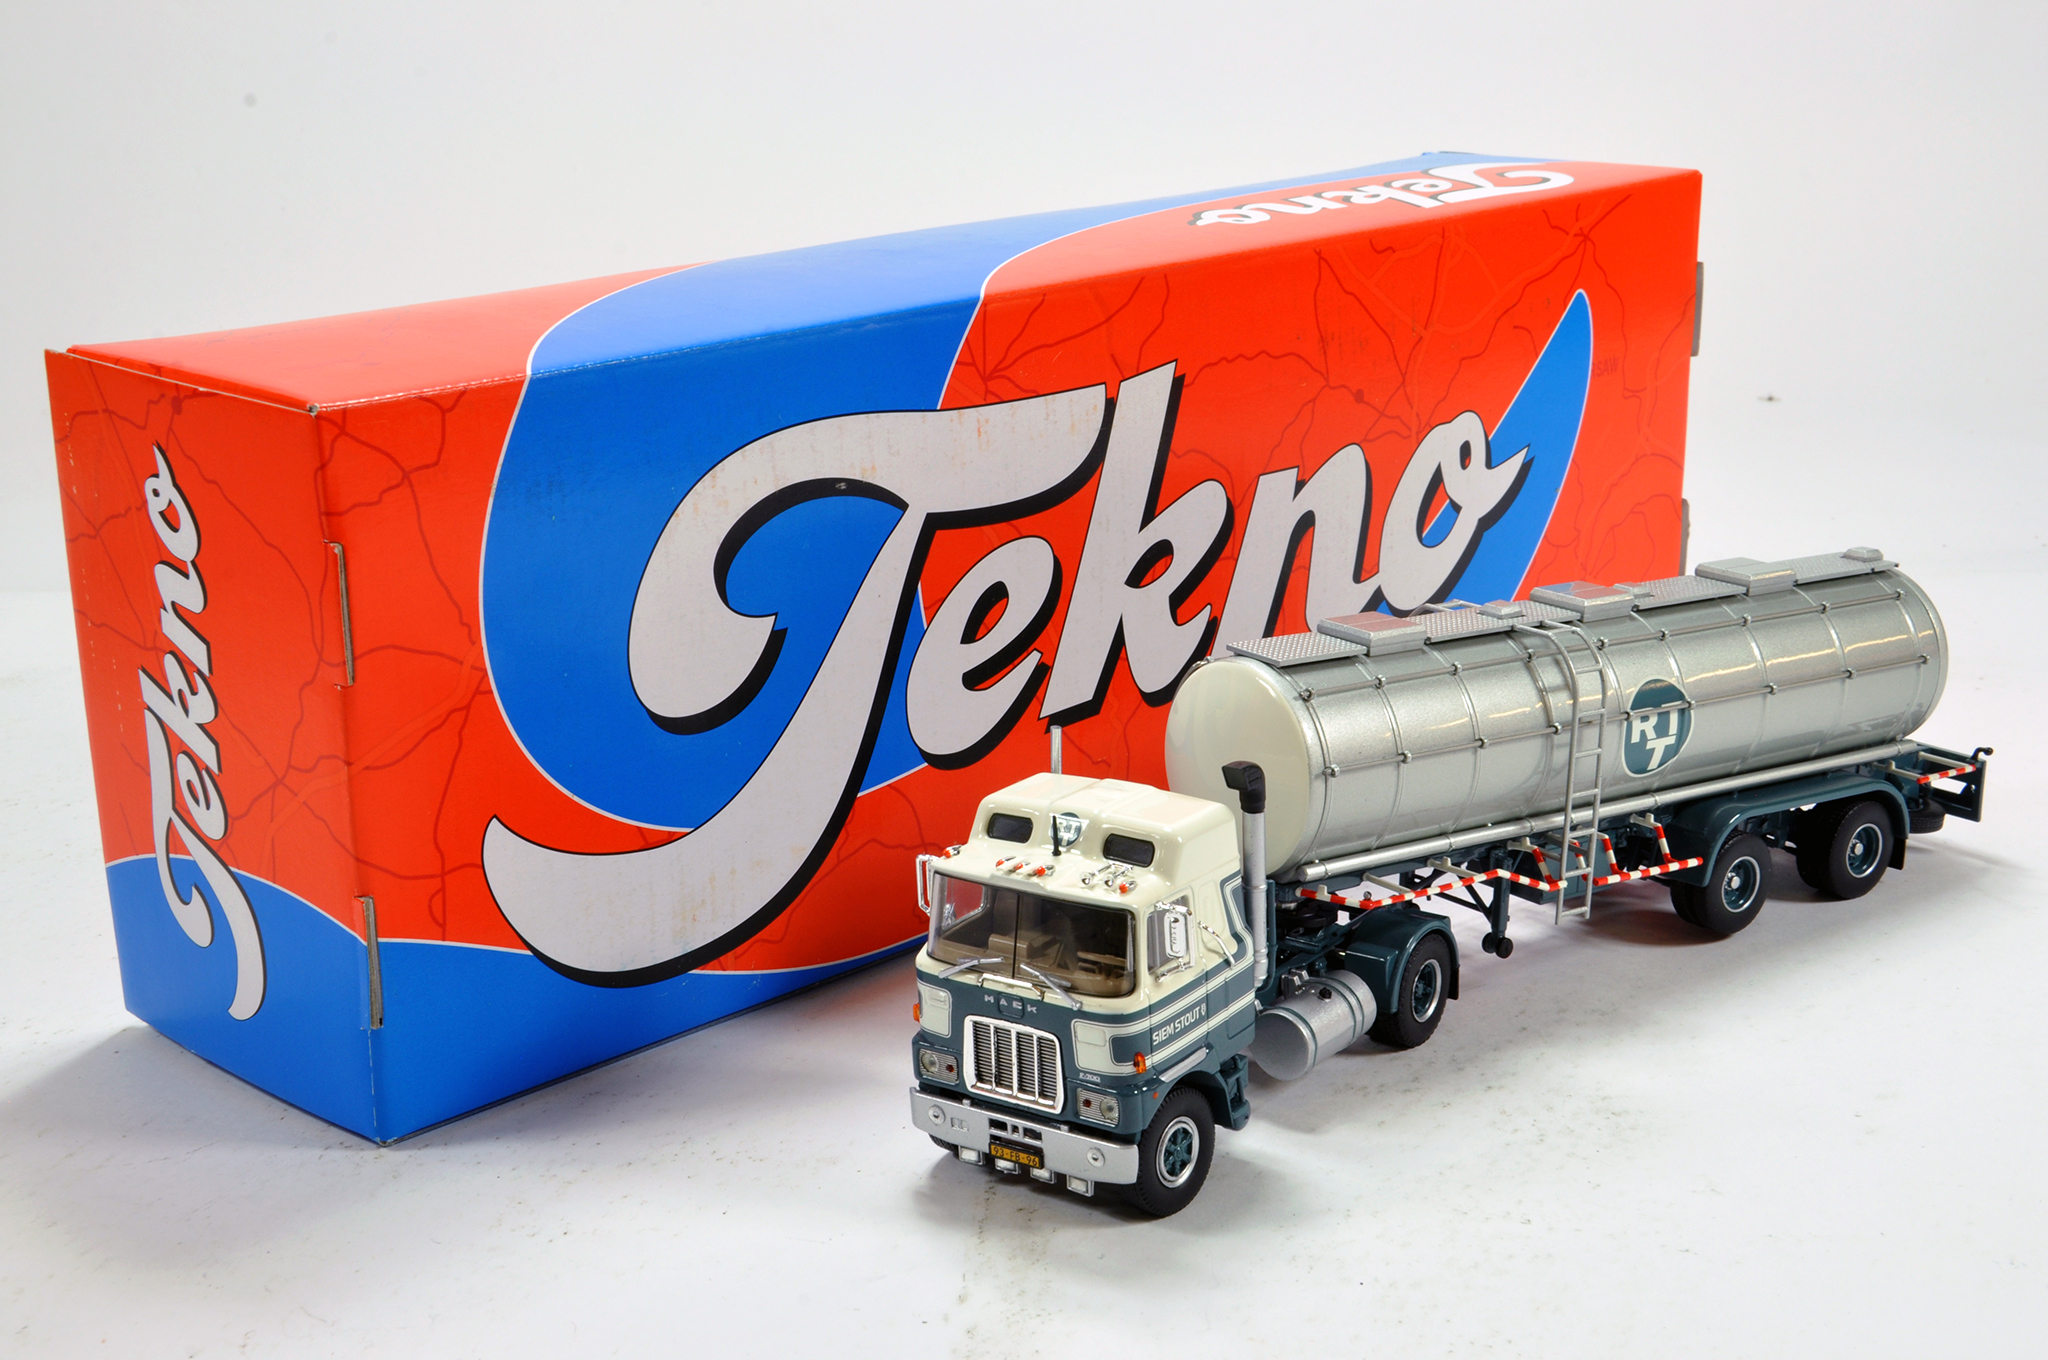 Tekno 1/50 Diecast Truck Issue Comprising Mack Tanker in livery of Stout Siem. NM to M in Box.